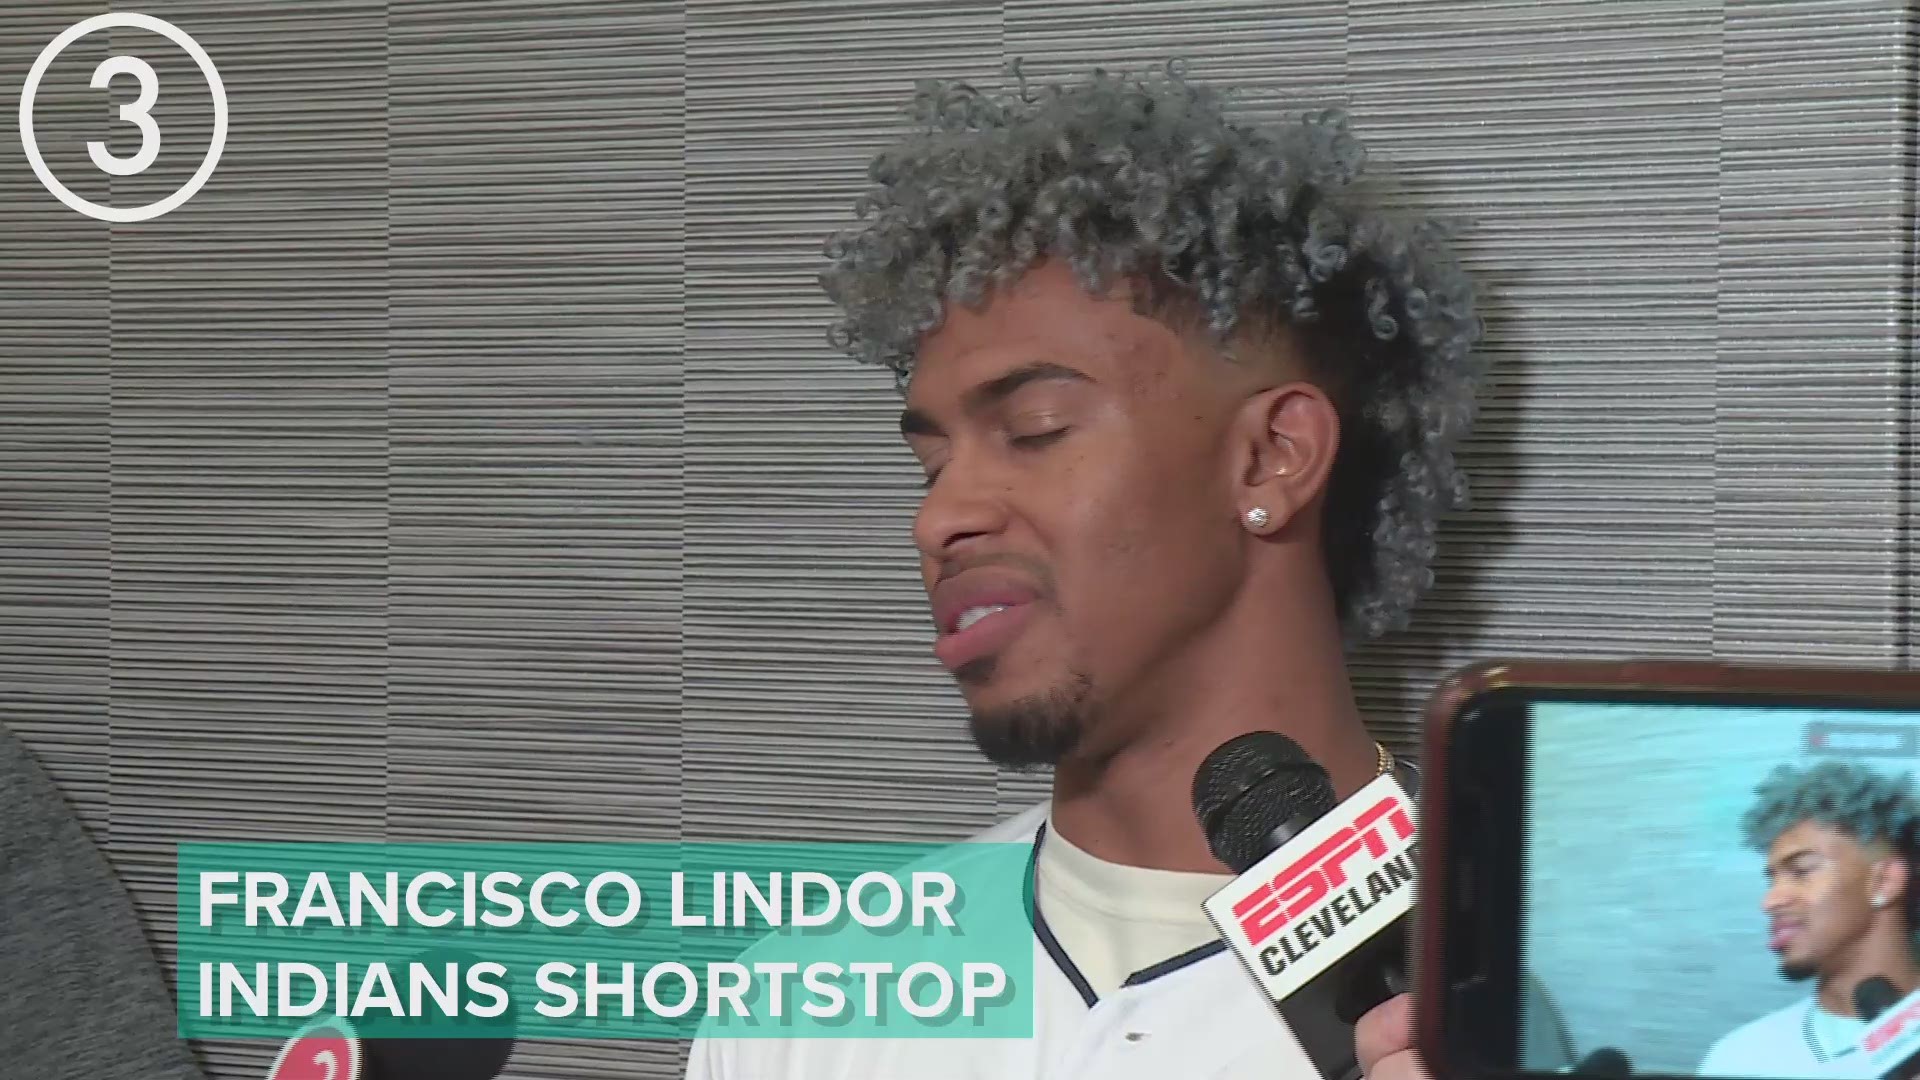 Indians shortstop Francisco Lindor is 'championship driven, not money driven.'  However, Lindor admitted that Cleveland hasn't offered him "the right amount yet."